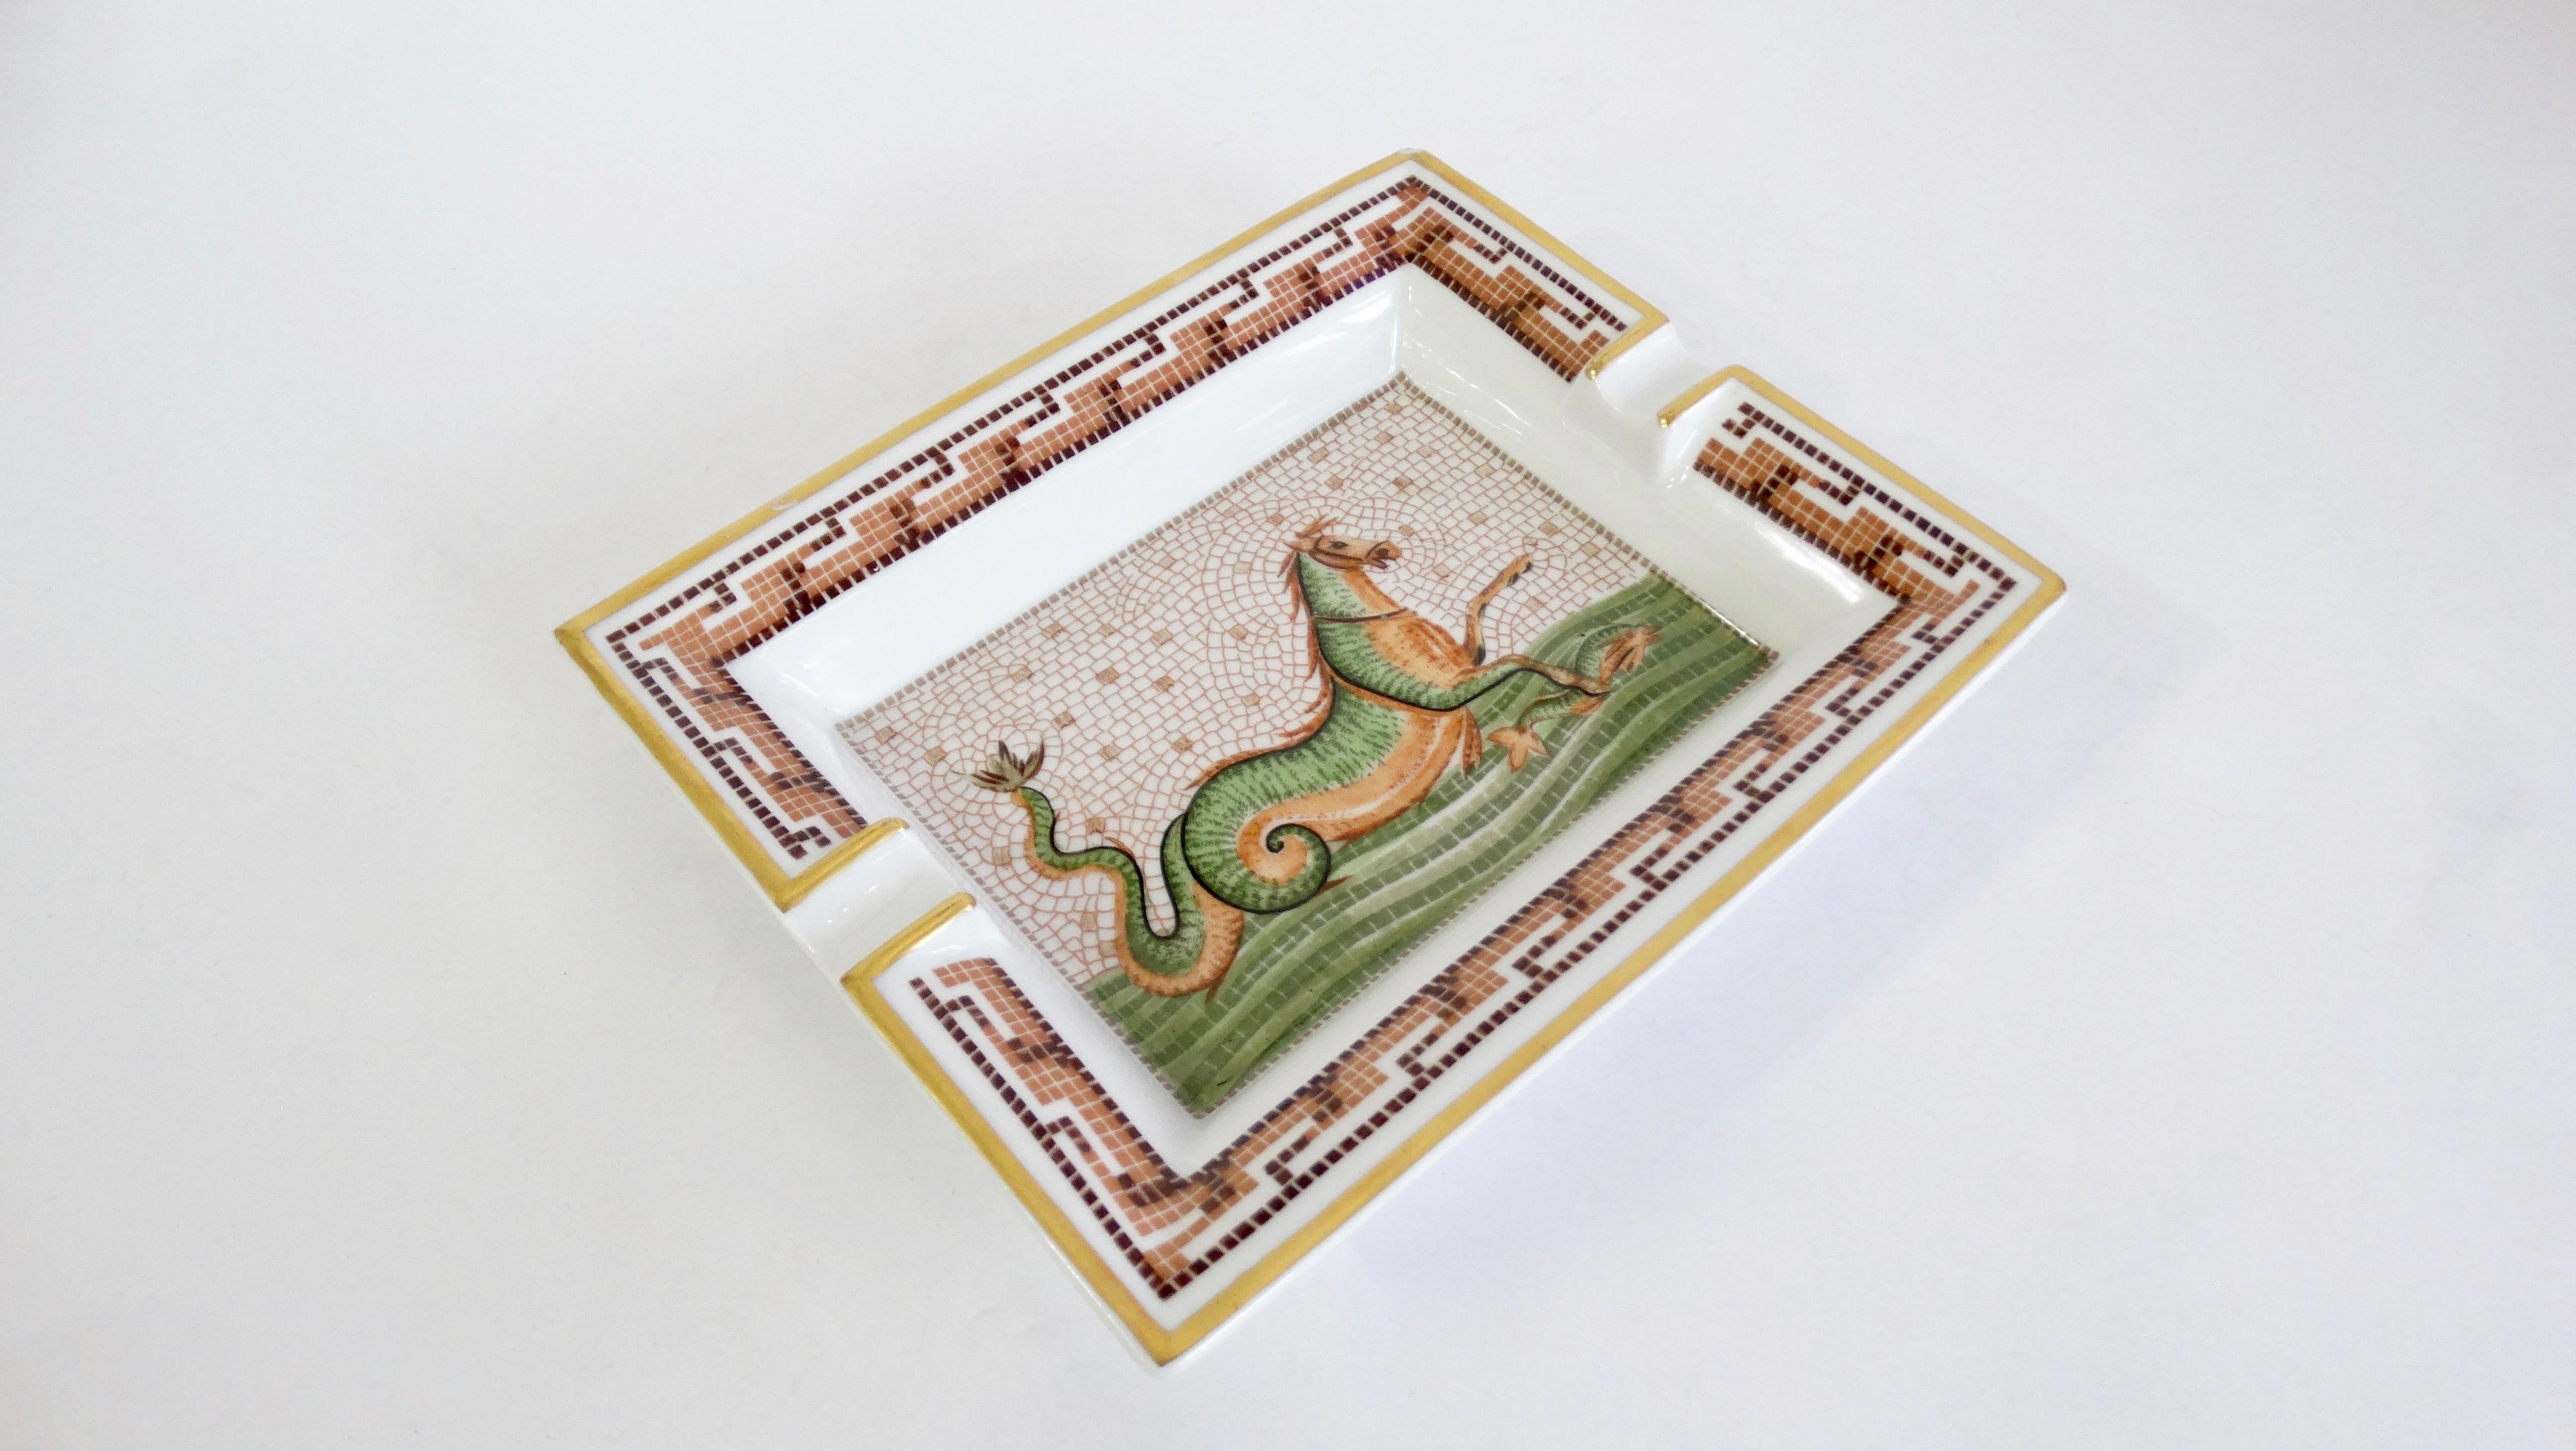 Decorate in style with this amazing Hermés tray! Circa 2000s, this tray is crafted from porcelain and features a mosaic Hippocamp motif derived from Greek mythology. Trim is painted in metallic gold and includes a decorative mosaic pattern framing